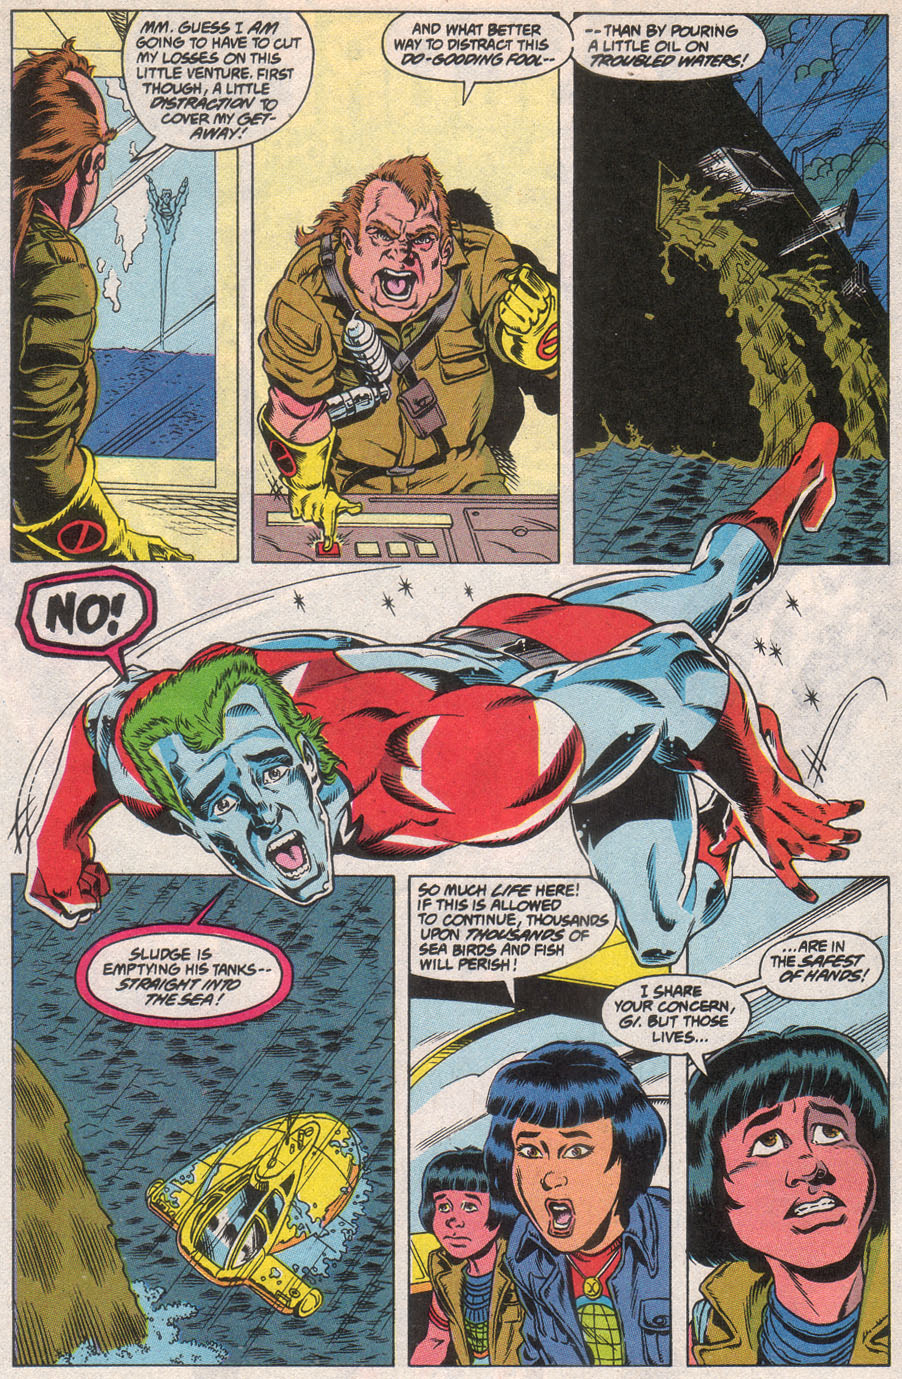 Captain Planet and the Planeteers 9 Page 9